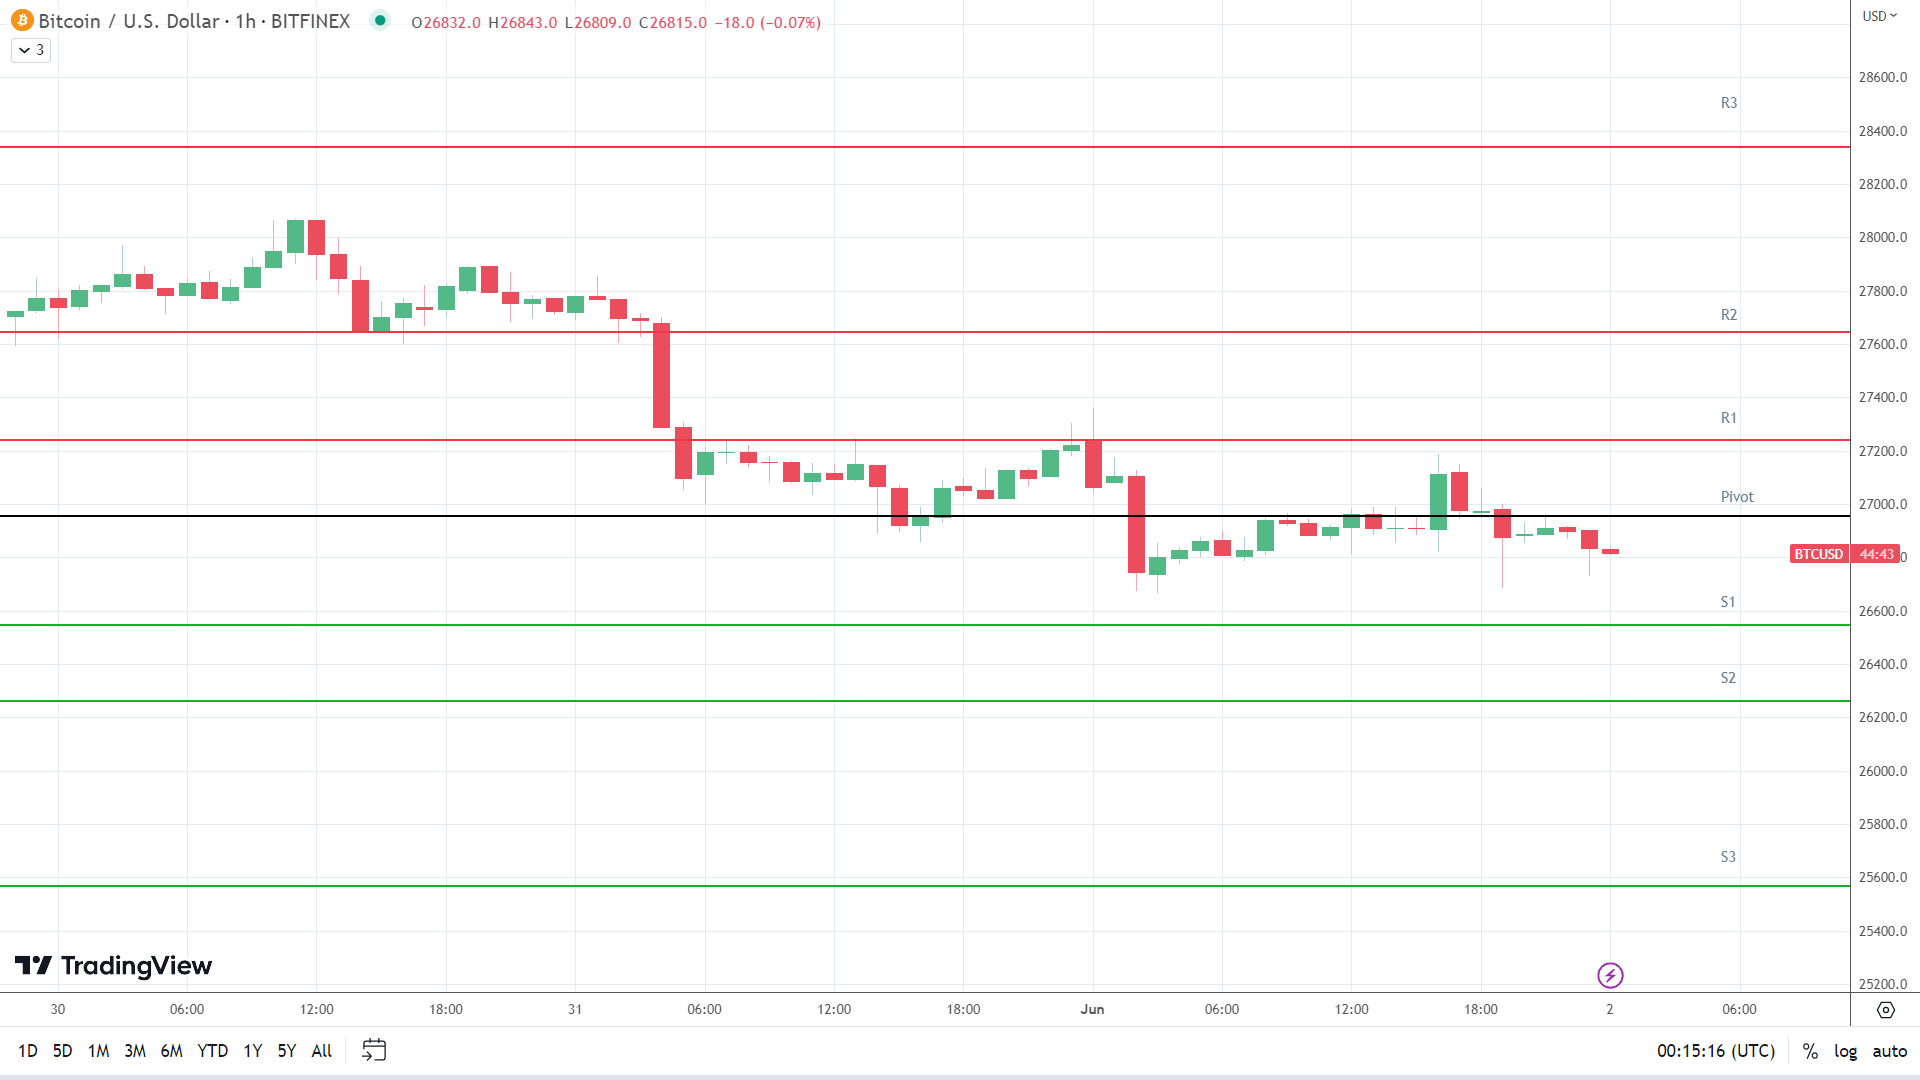 BTC support levels in play below the pivot.